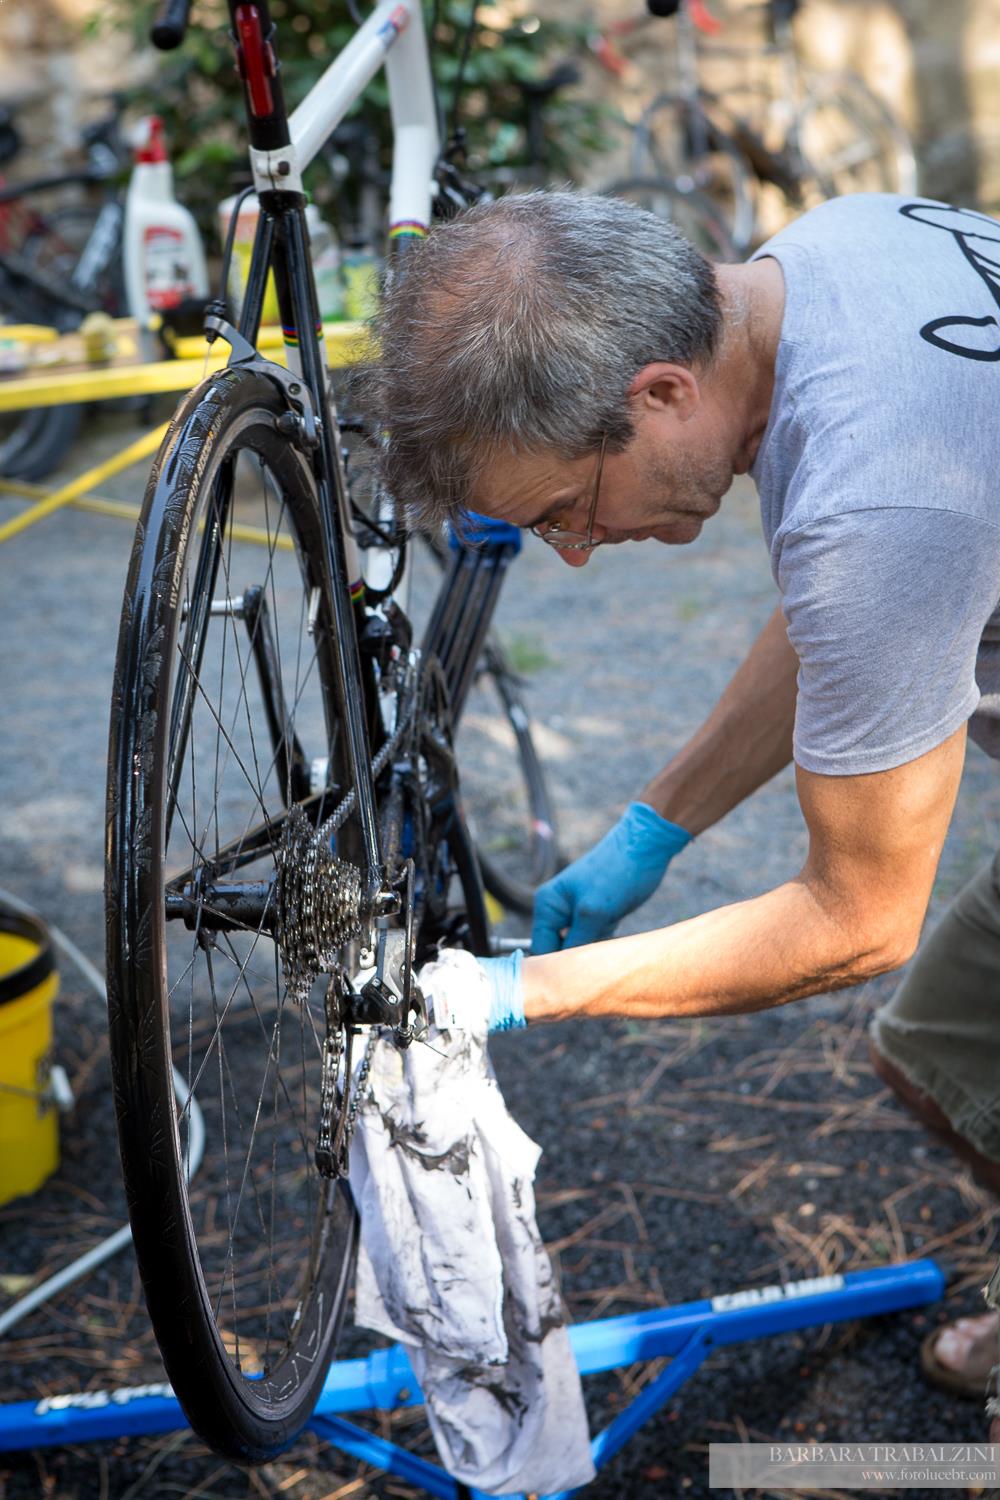 Bike maintenance at the end of a day's ride